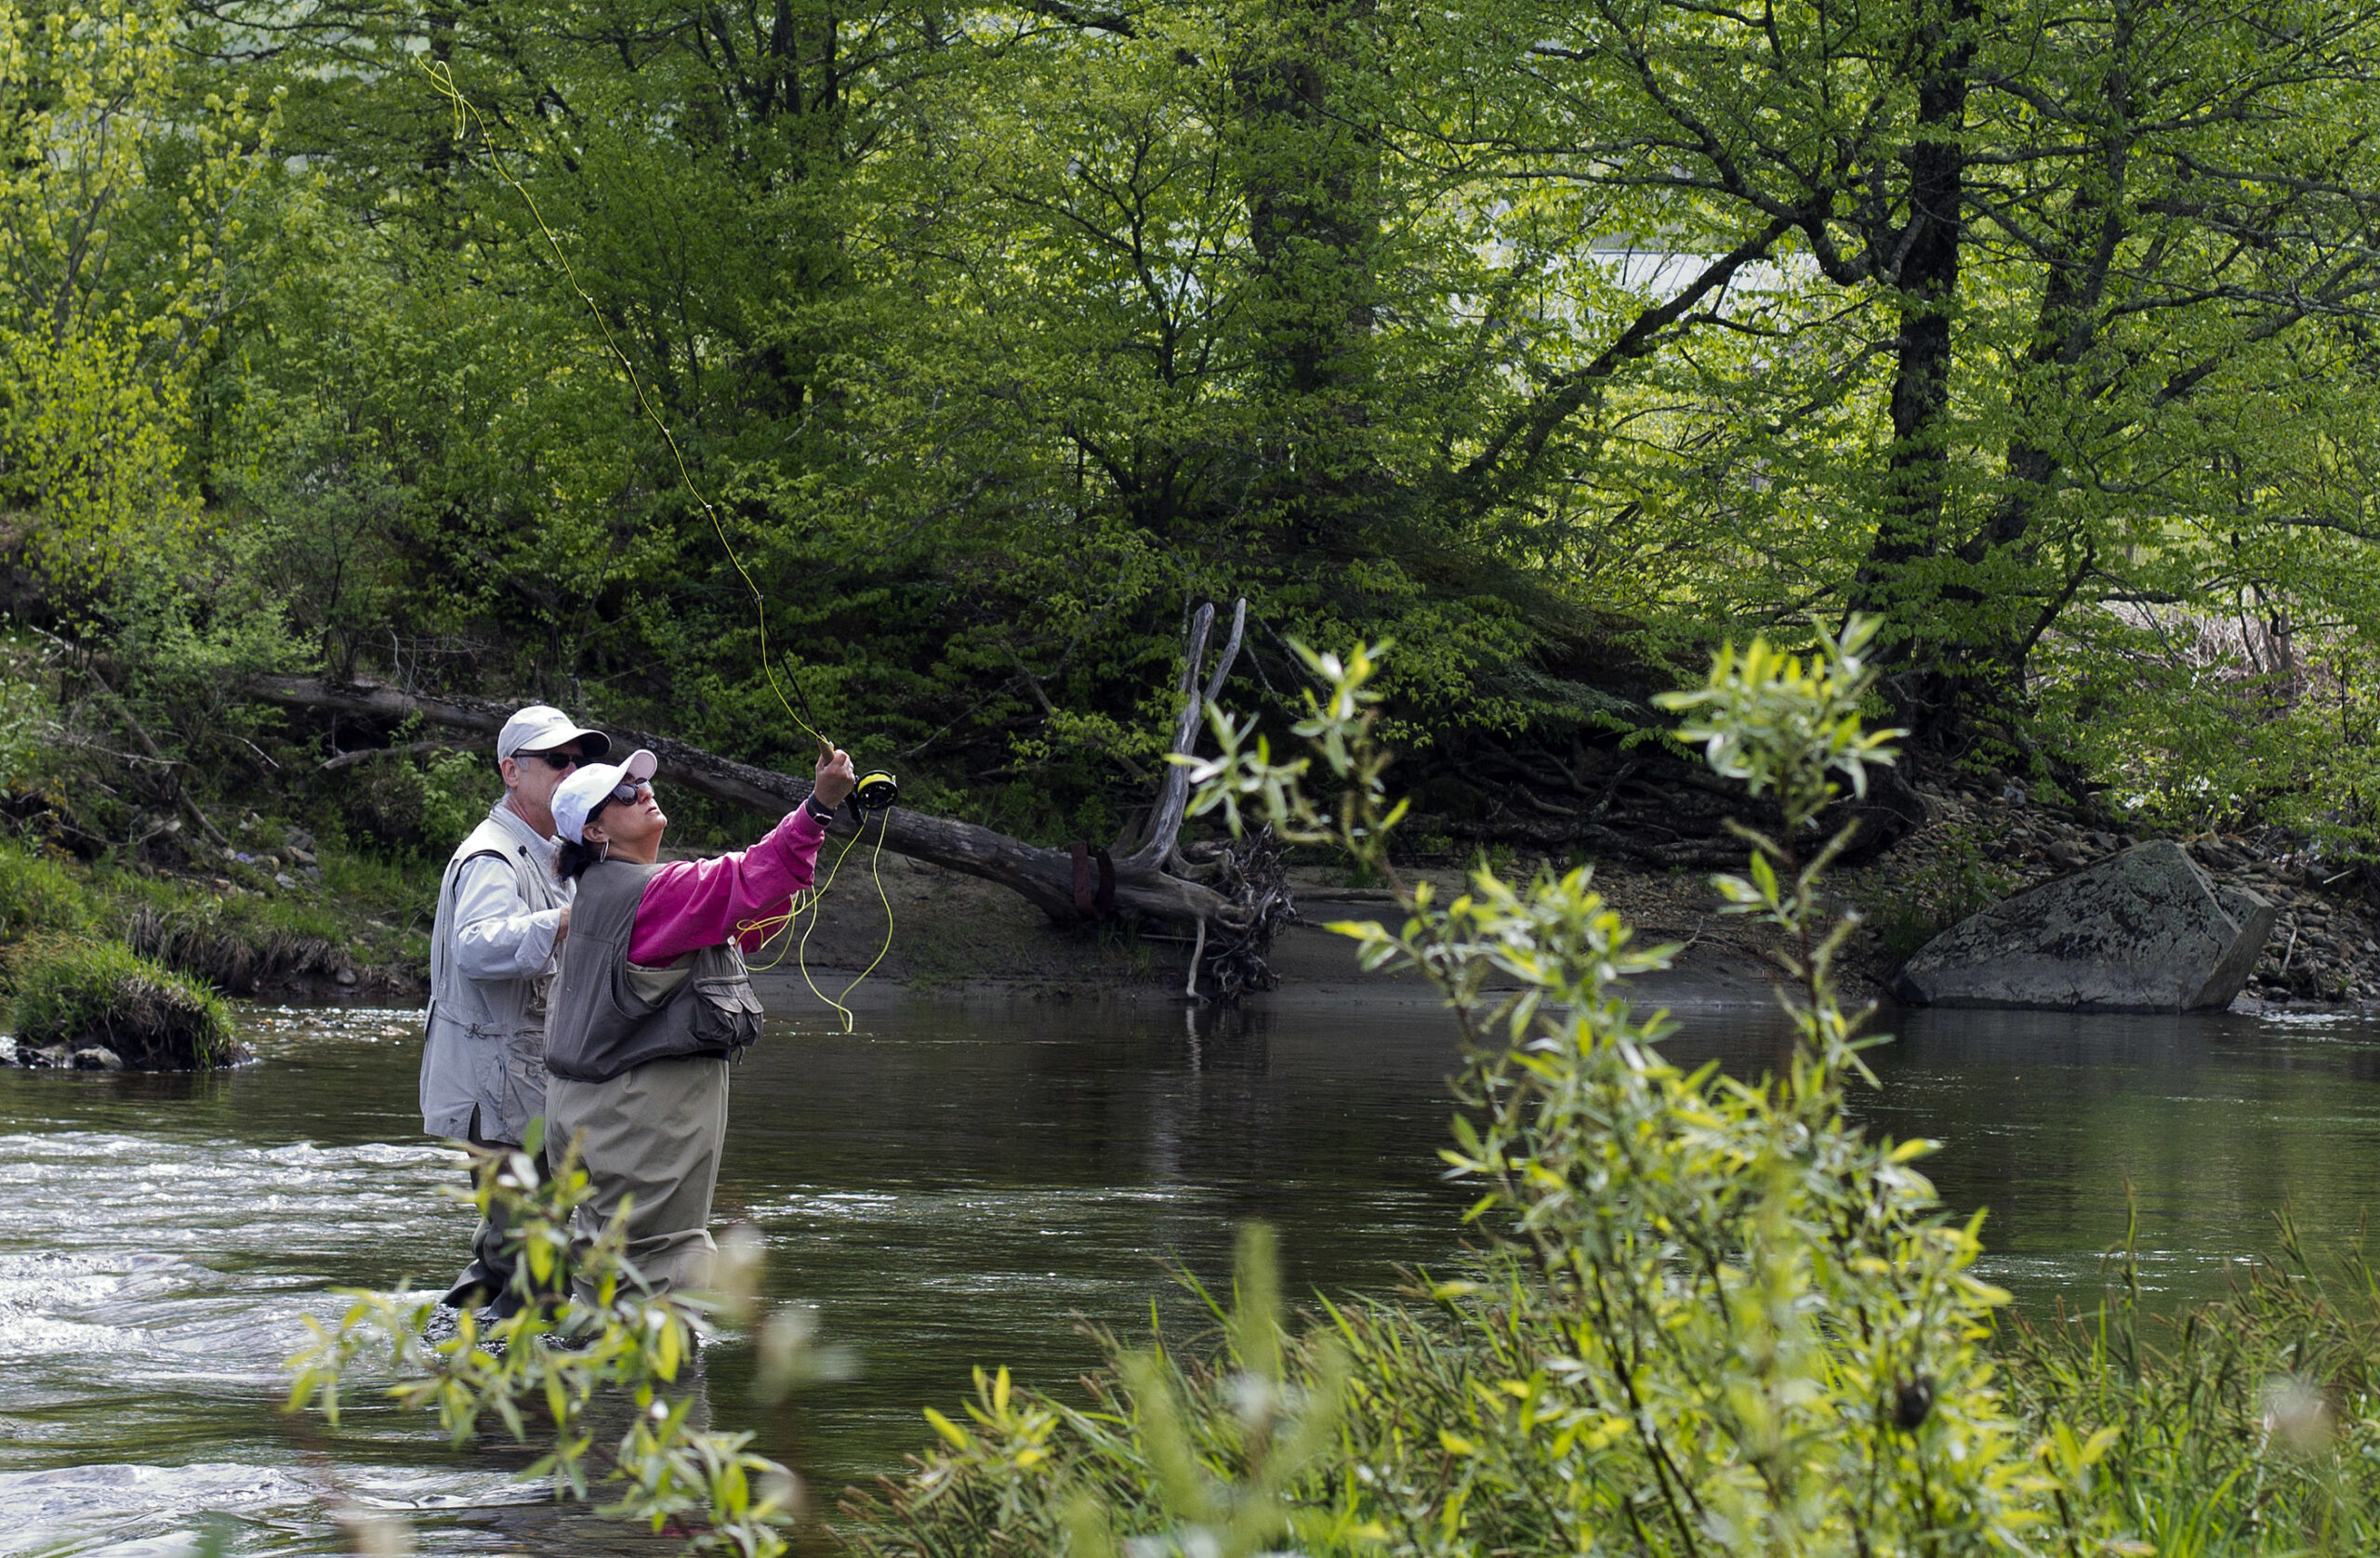 Two people fly fish in a river.